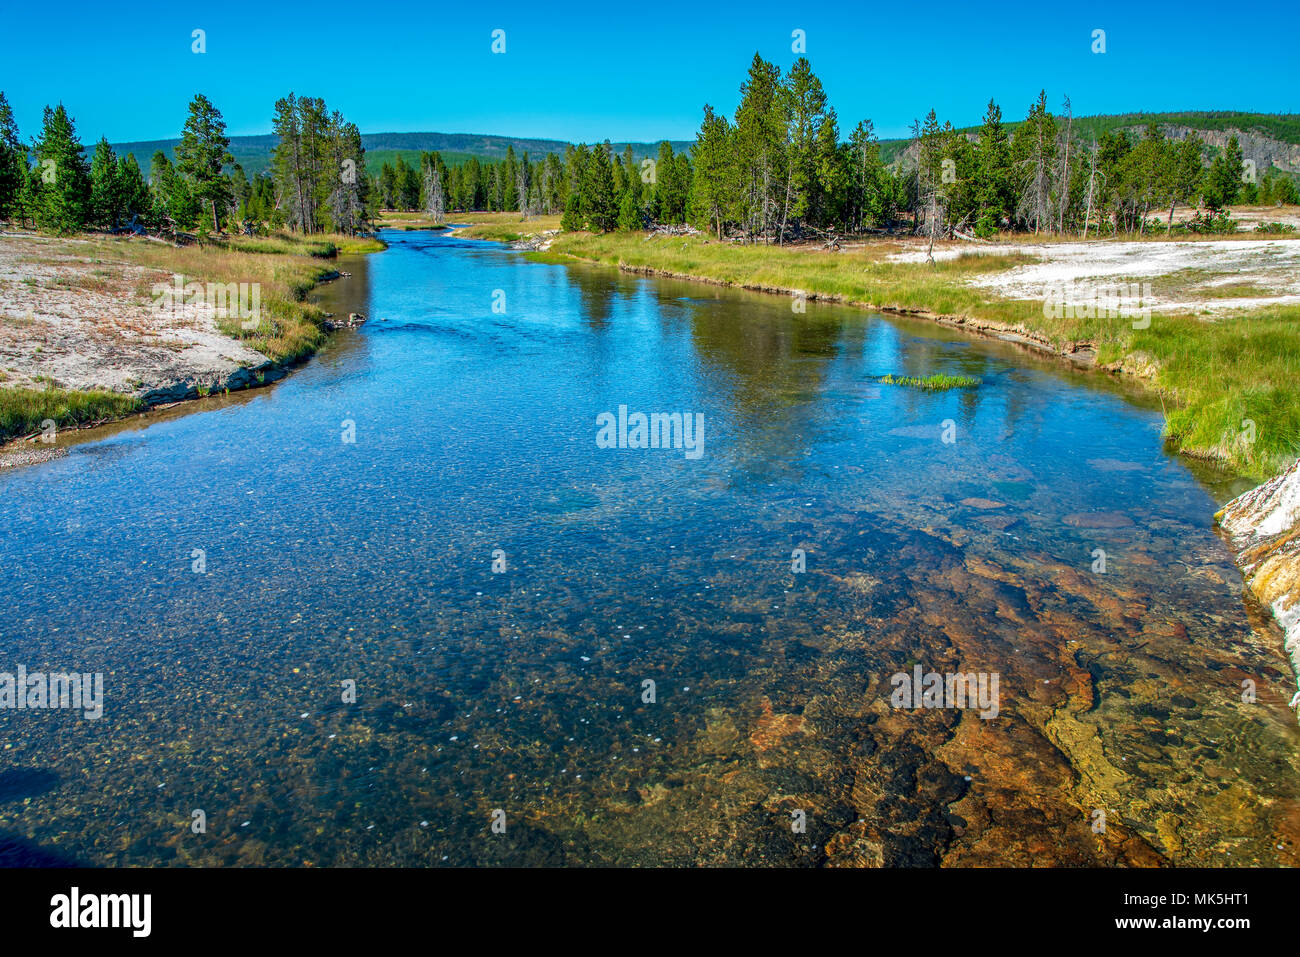 Scenic clear slow moving river running into green forest with tall pine trees under clear blue sky. Stock Photo